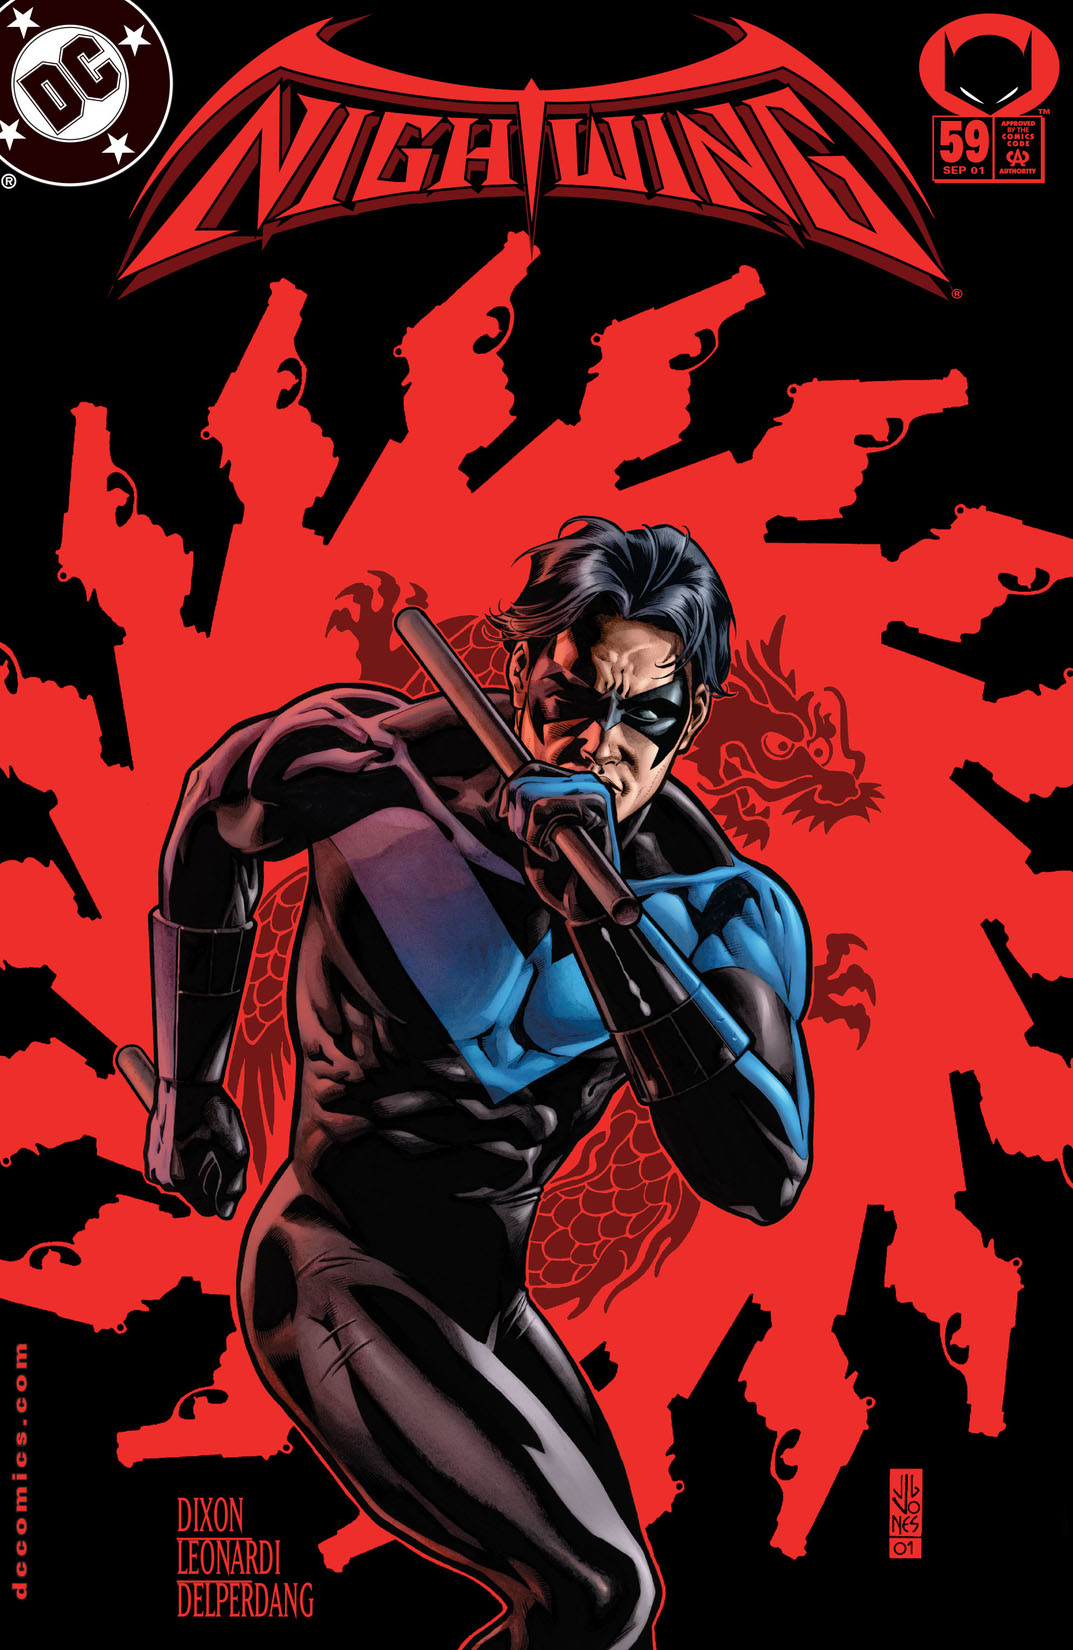 Nightwing (1996-) #59 preview images